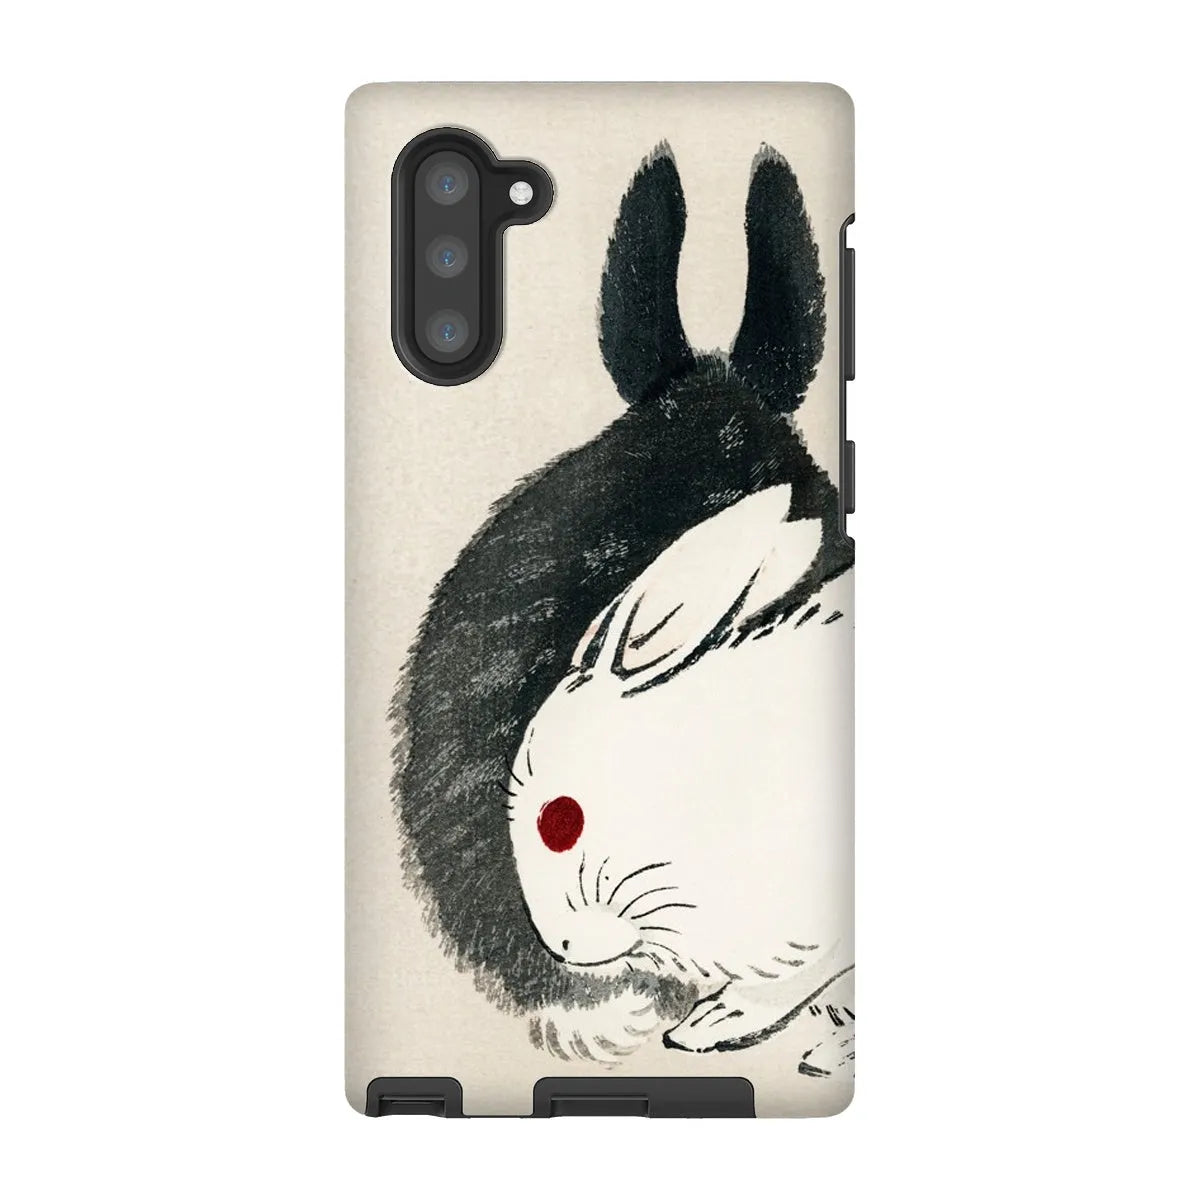 Rabbits - Black And White Meiji Art Phone Case - Kōno Bairei - Samsung Galaxy Note 10 / Matte - Mobile Phone Cases